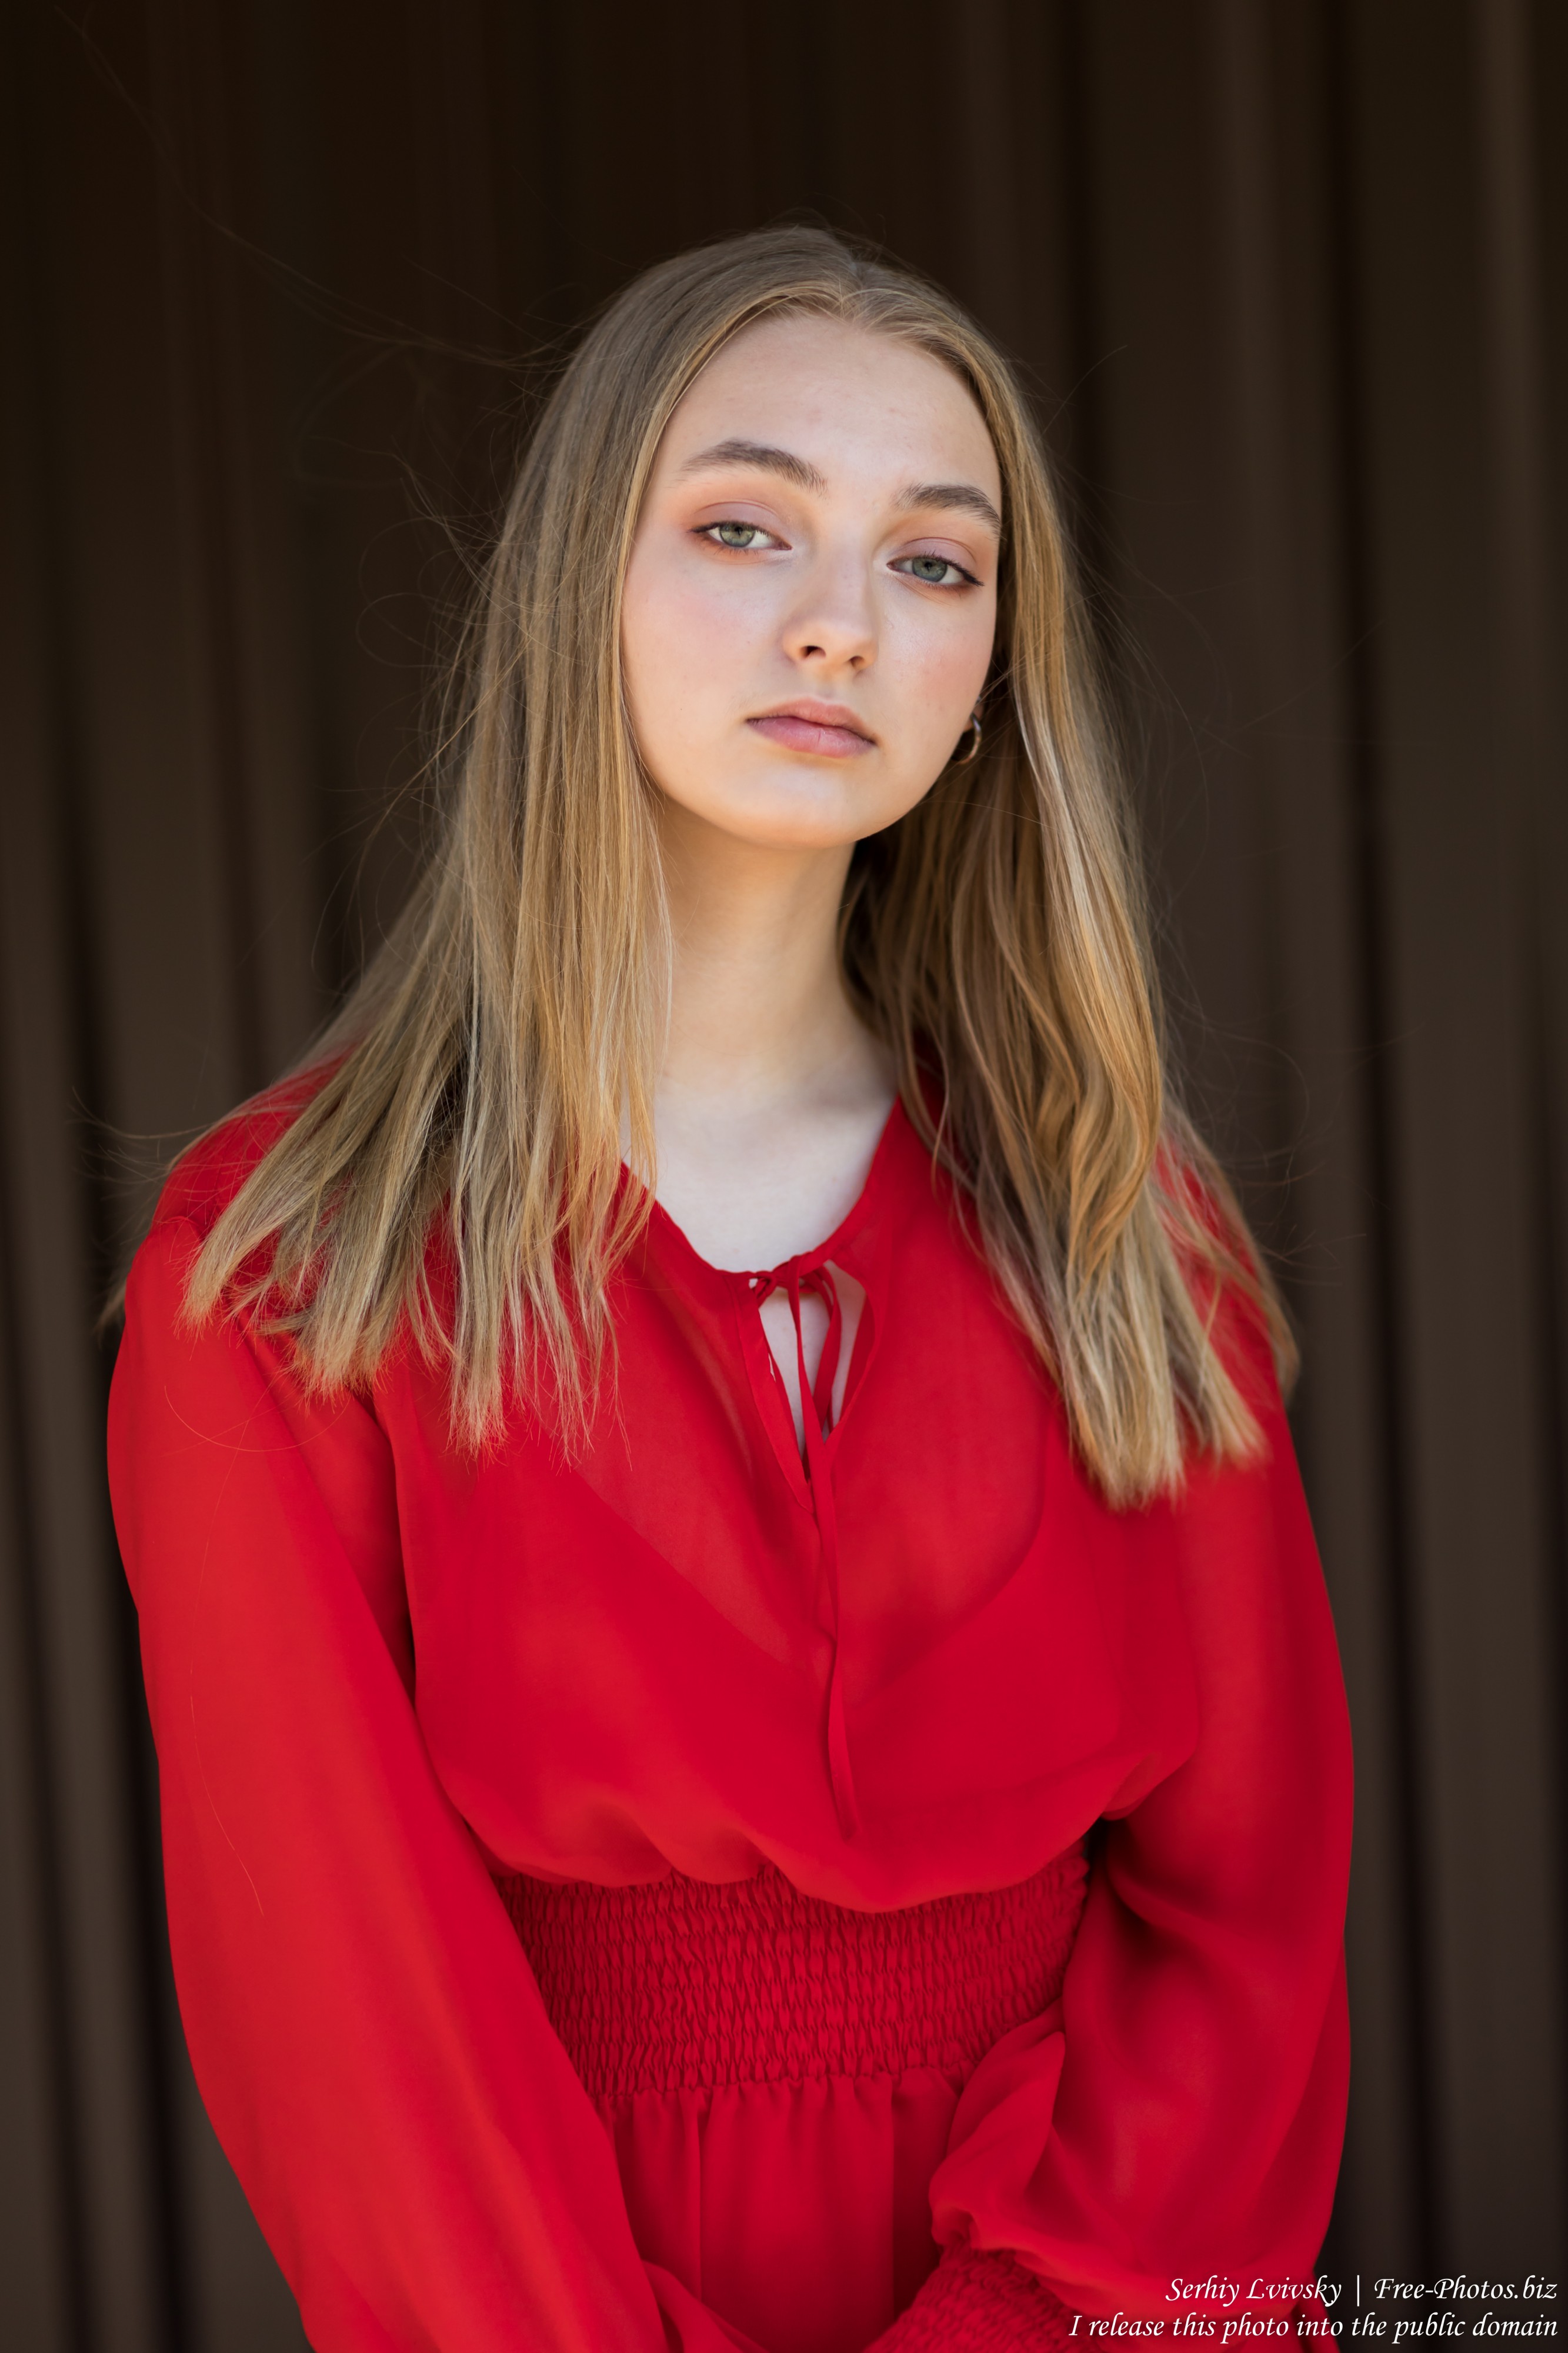 Photo Of Nastia A 16 Year Old Natural Blonde Girl Photographed In September 2019 By Serhiy